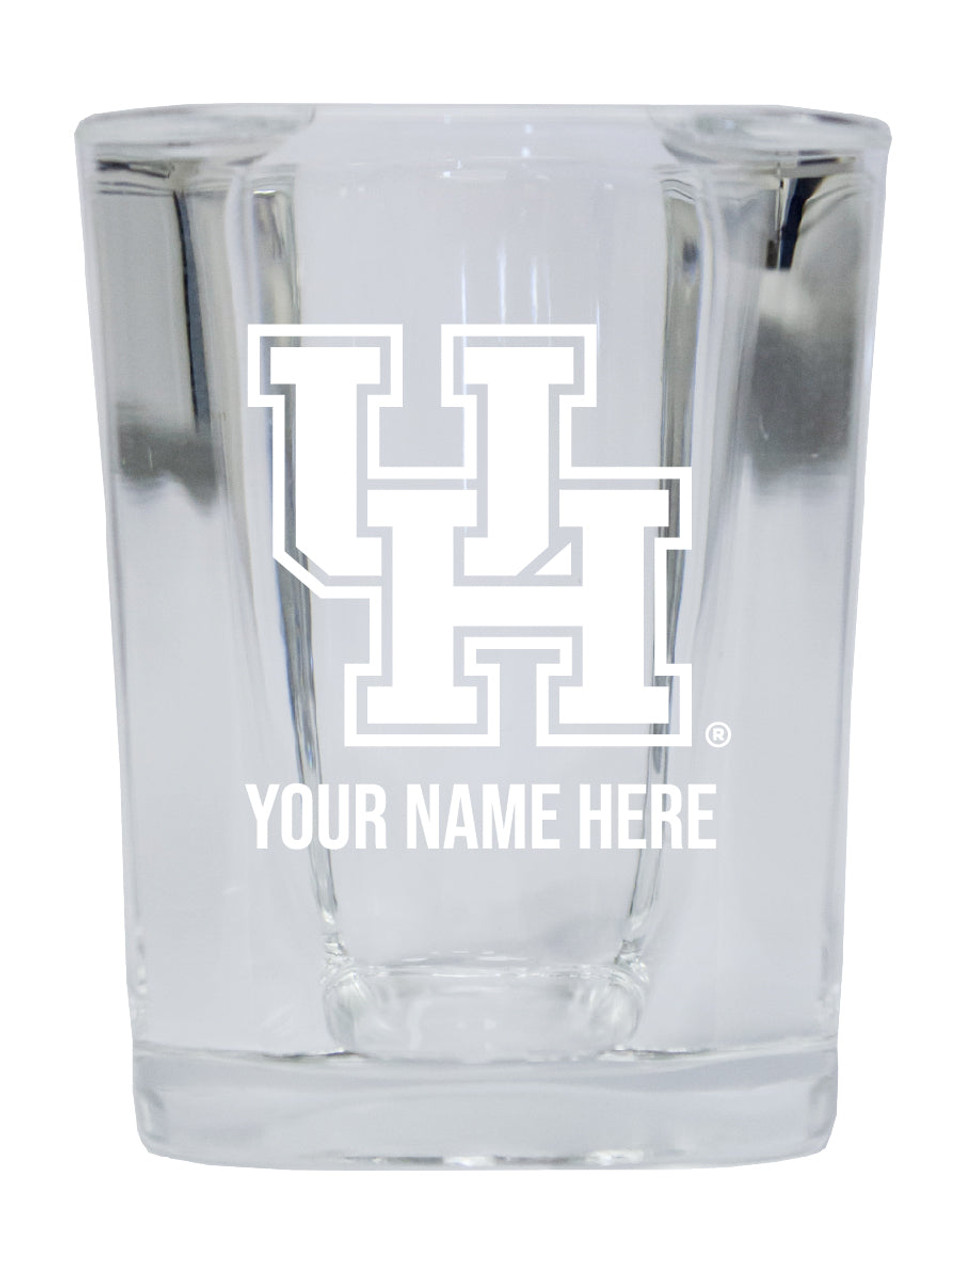 Personalized University of Houston Etched Square Shot Glass 2 oz With Custom Name